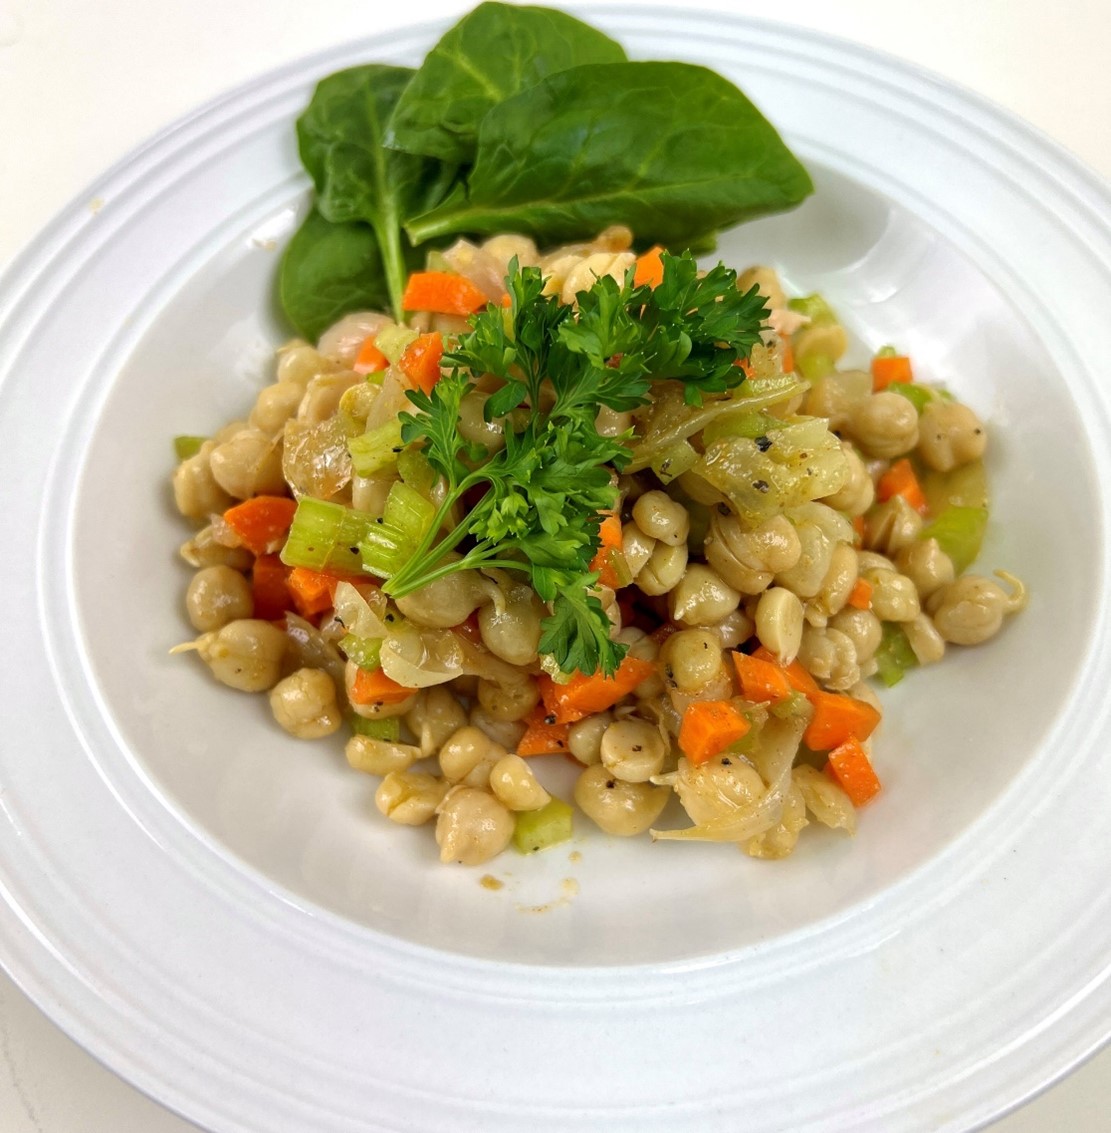 Organic Sprouted Chickpea Salad